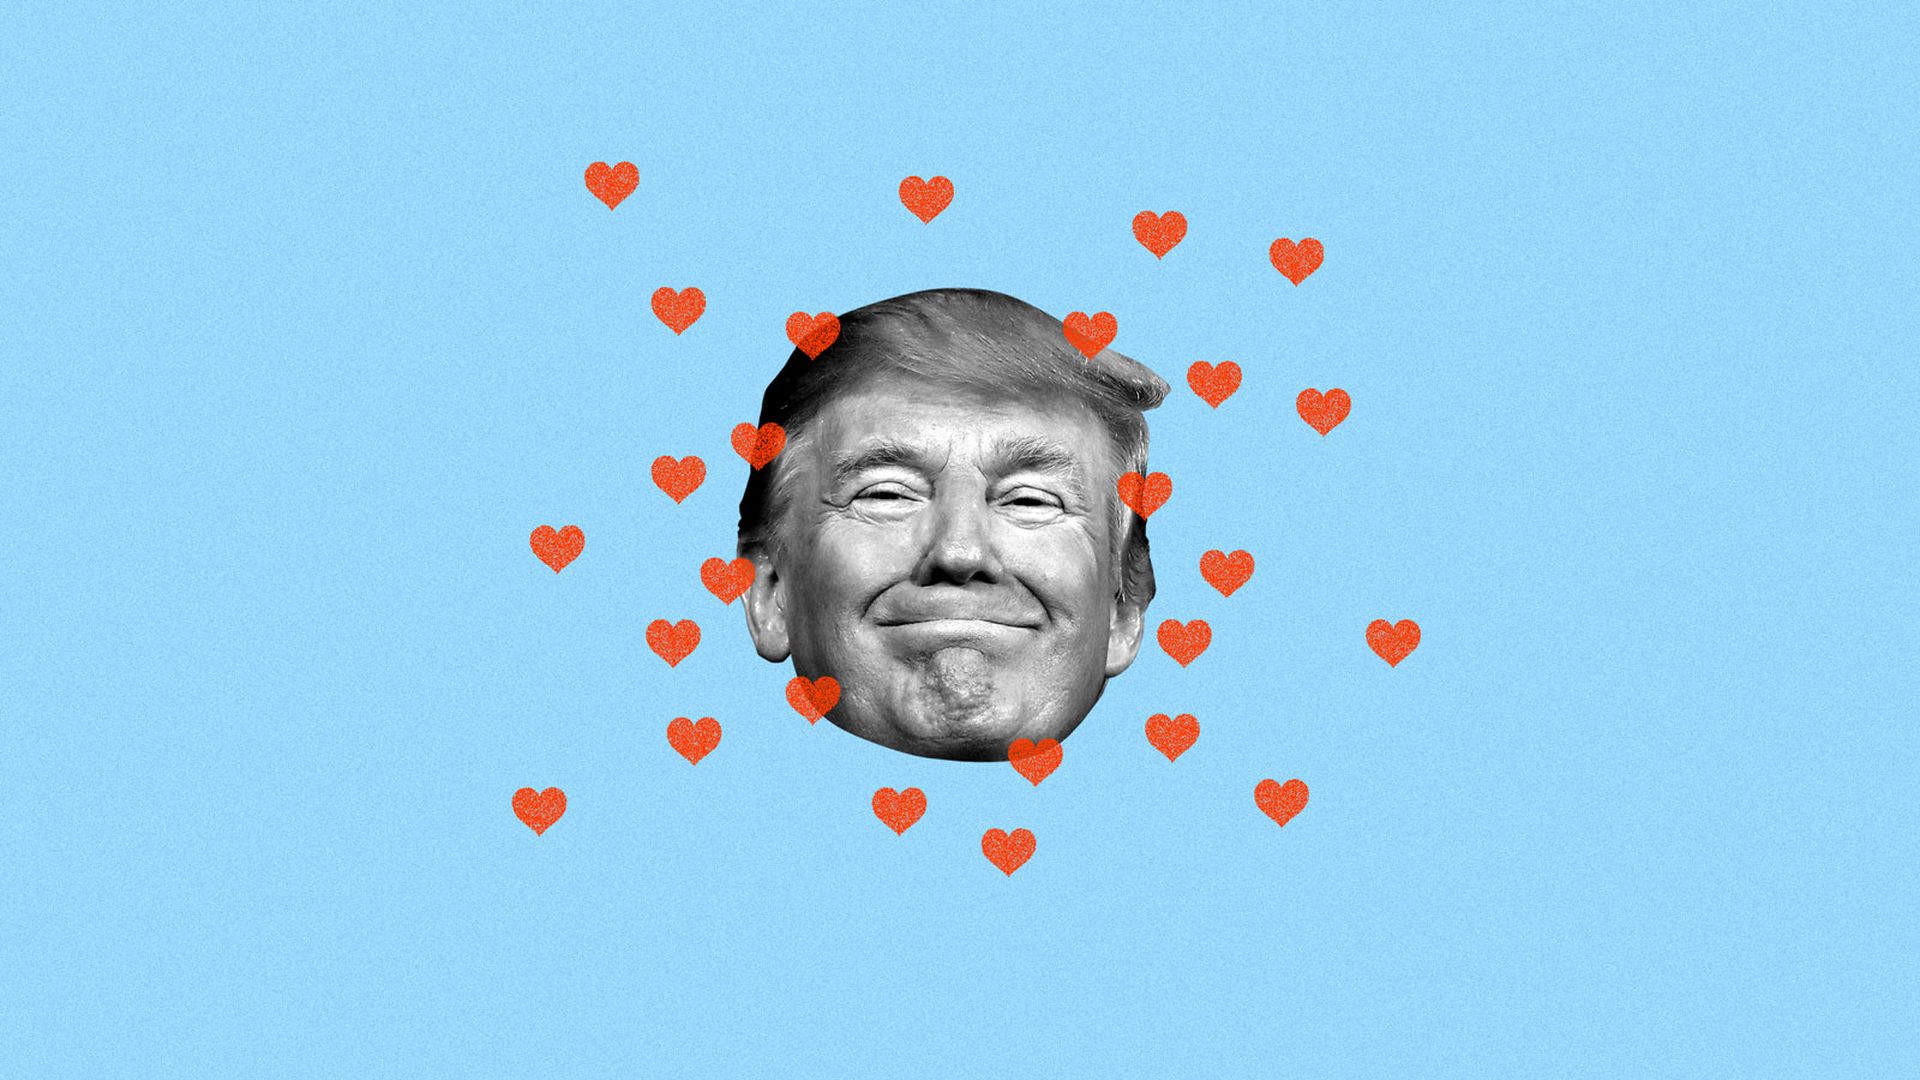 President Trump surrounded by small heart shapes